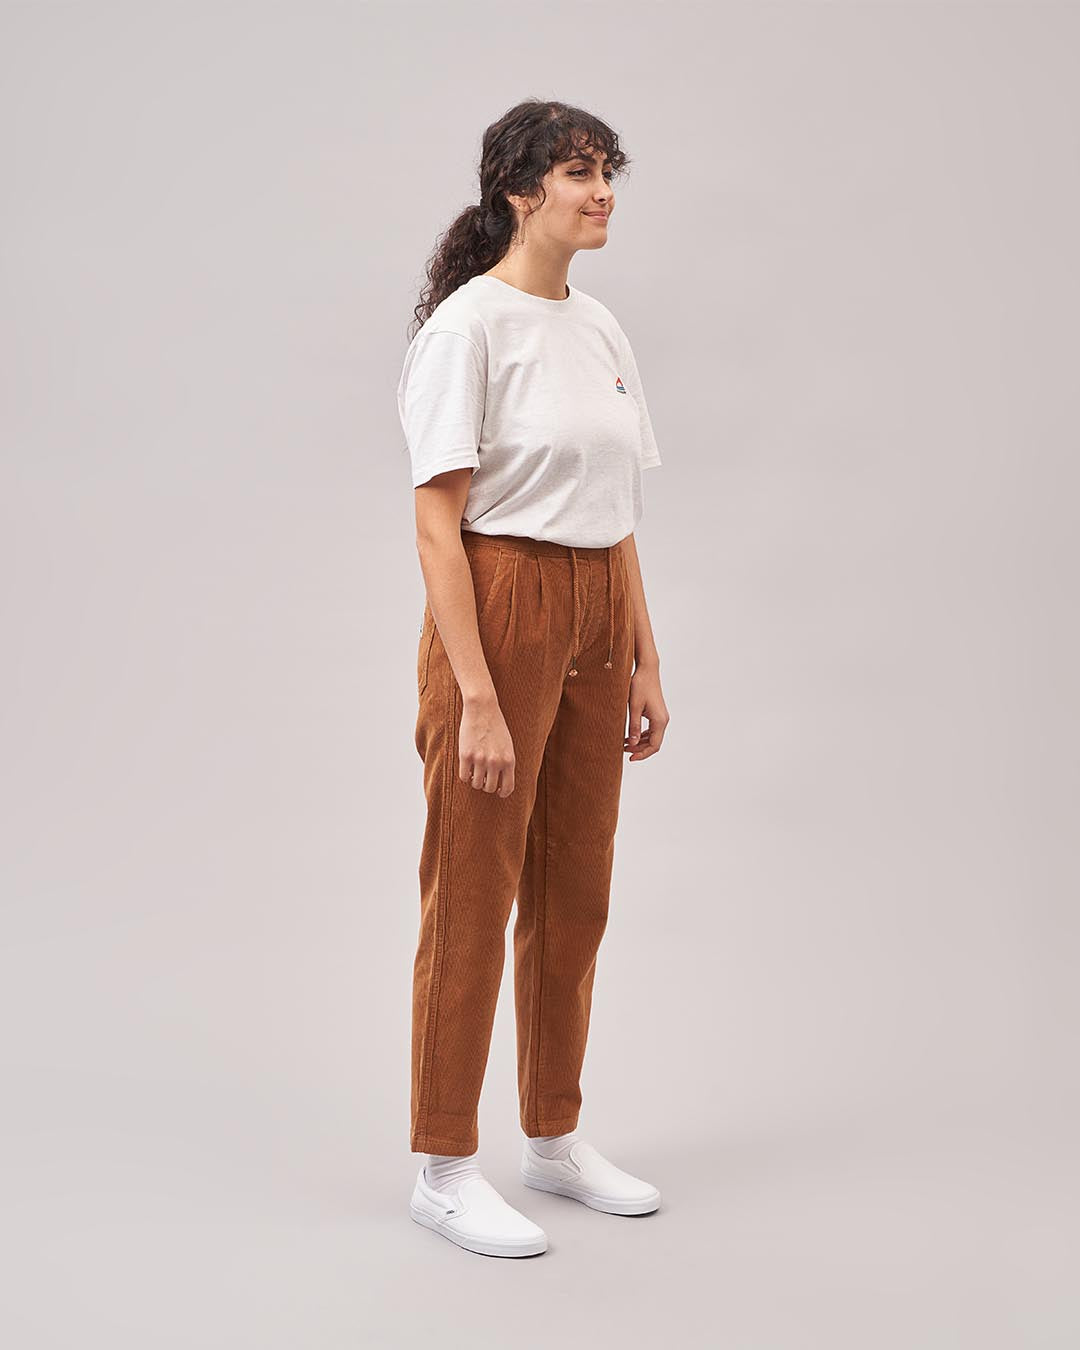 Relaxed Fit Corduroy Pant - Canvas Pigment | James Perse Los Angeles